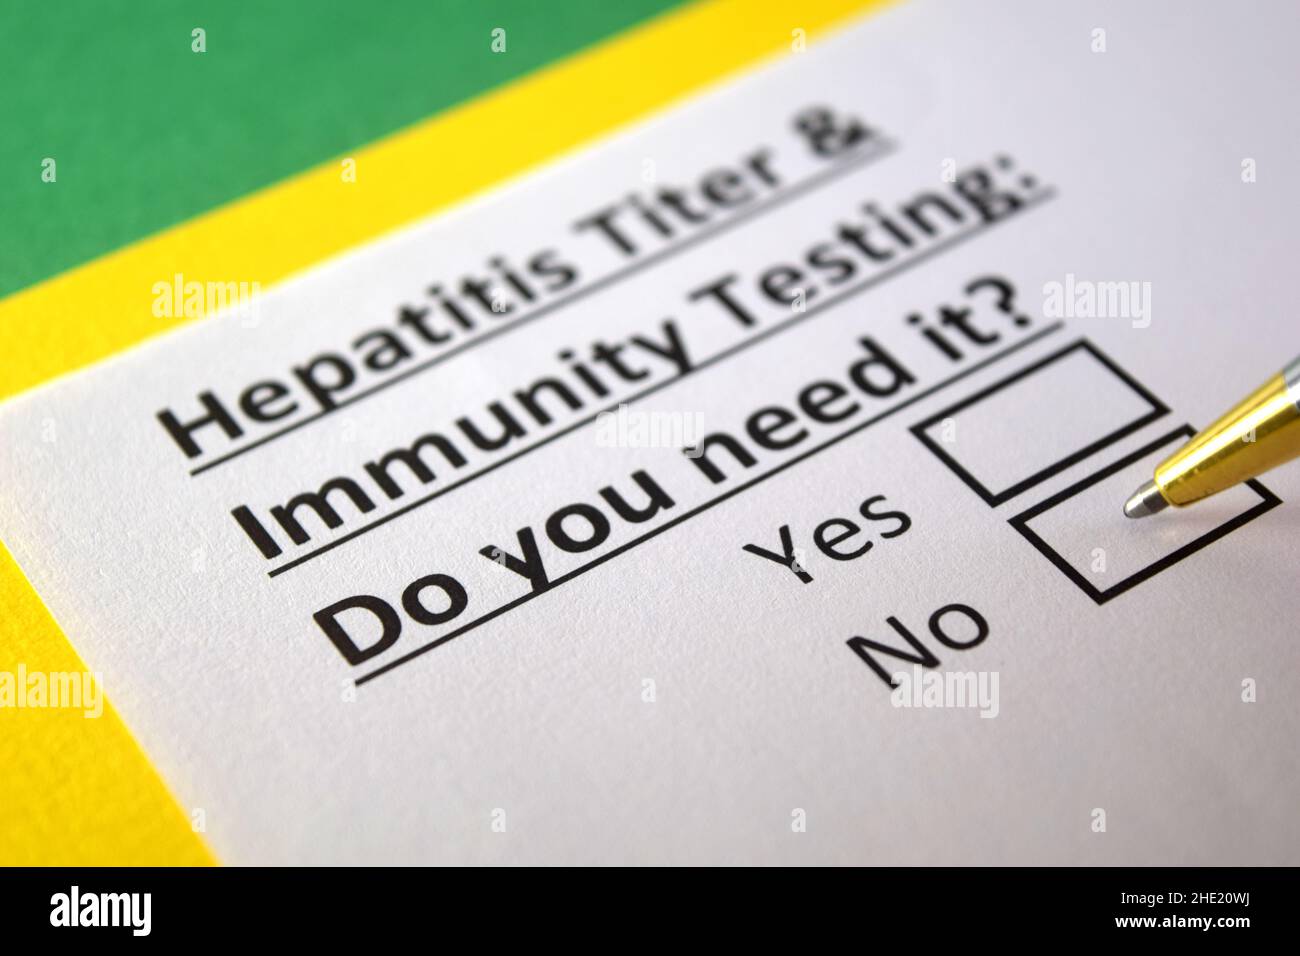 One person is answering question about hepatitis titer and immunity testing. Stock Photo